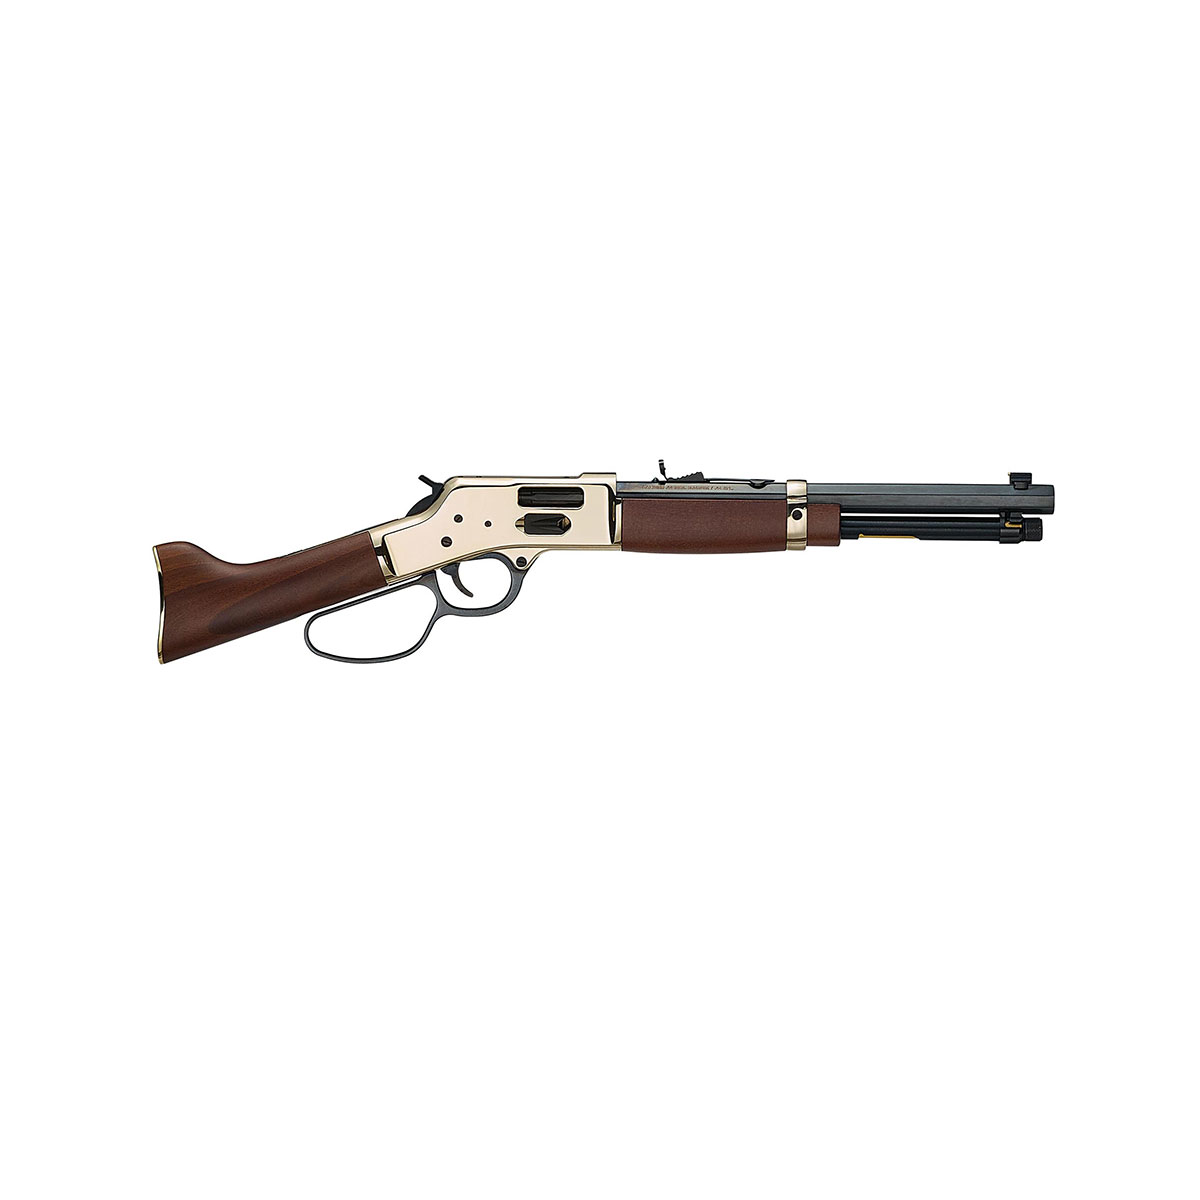 HENRY REPEATING ARMS - BIG BOY MARE&#39;S LEG 357 MAGNUM/38 SPECIAL LEVER ACTION HANDGUN